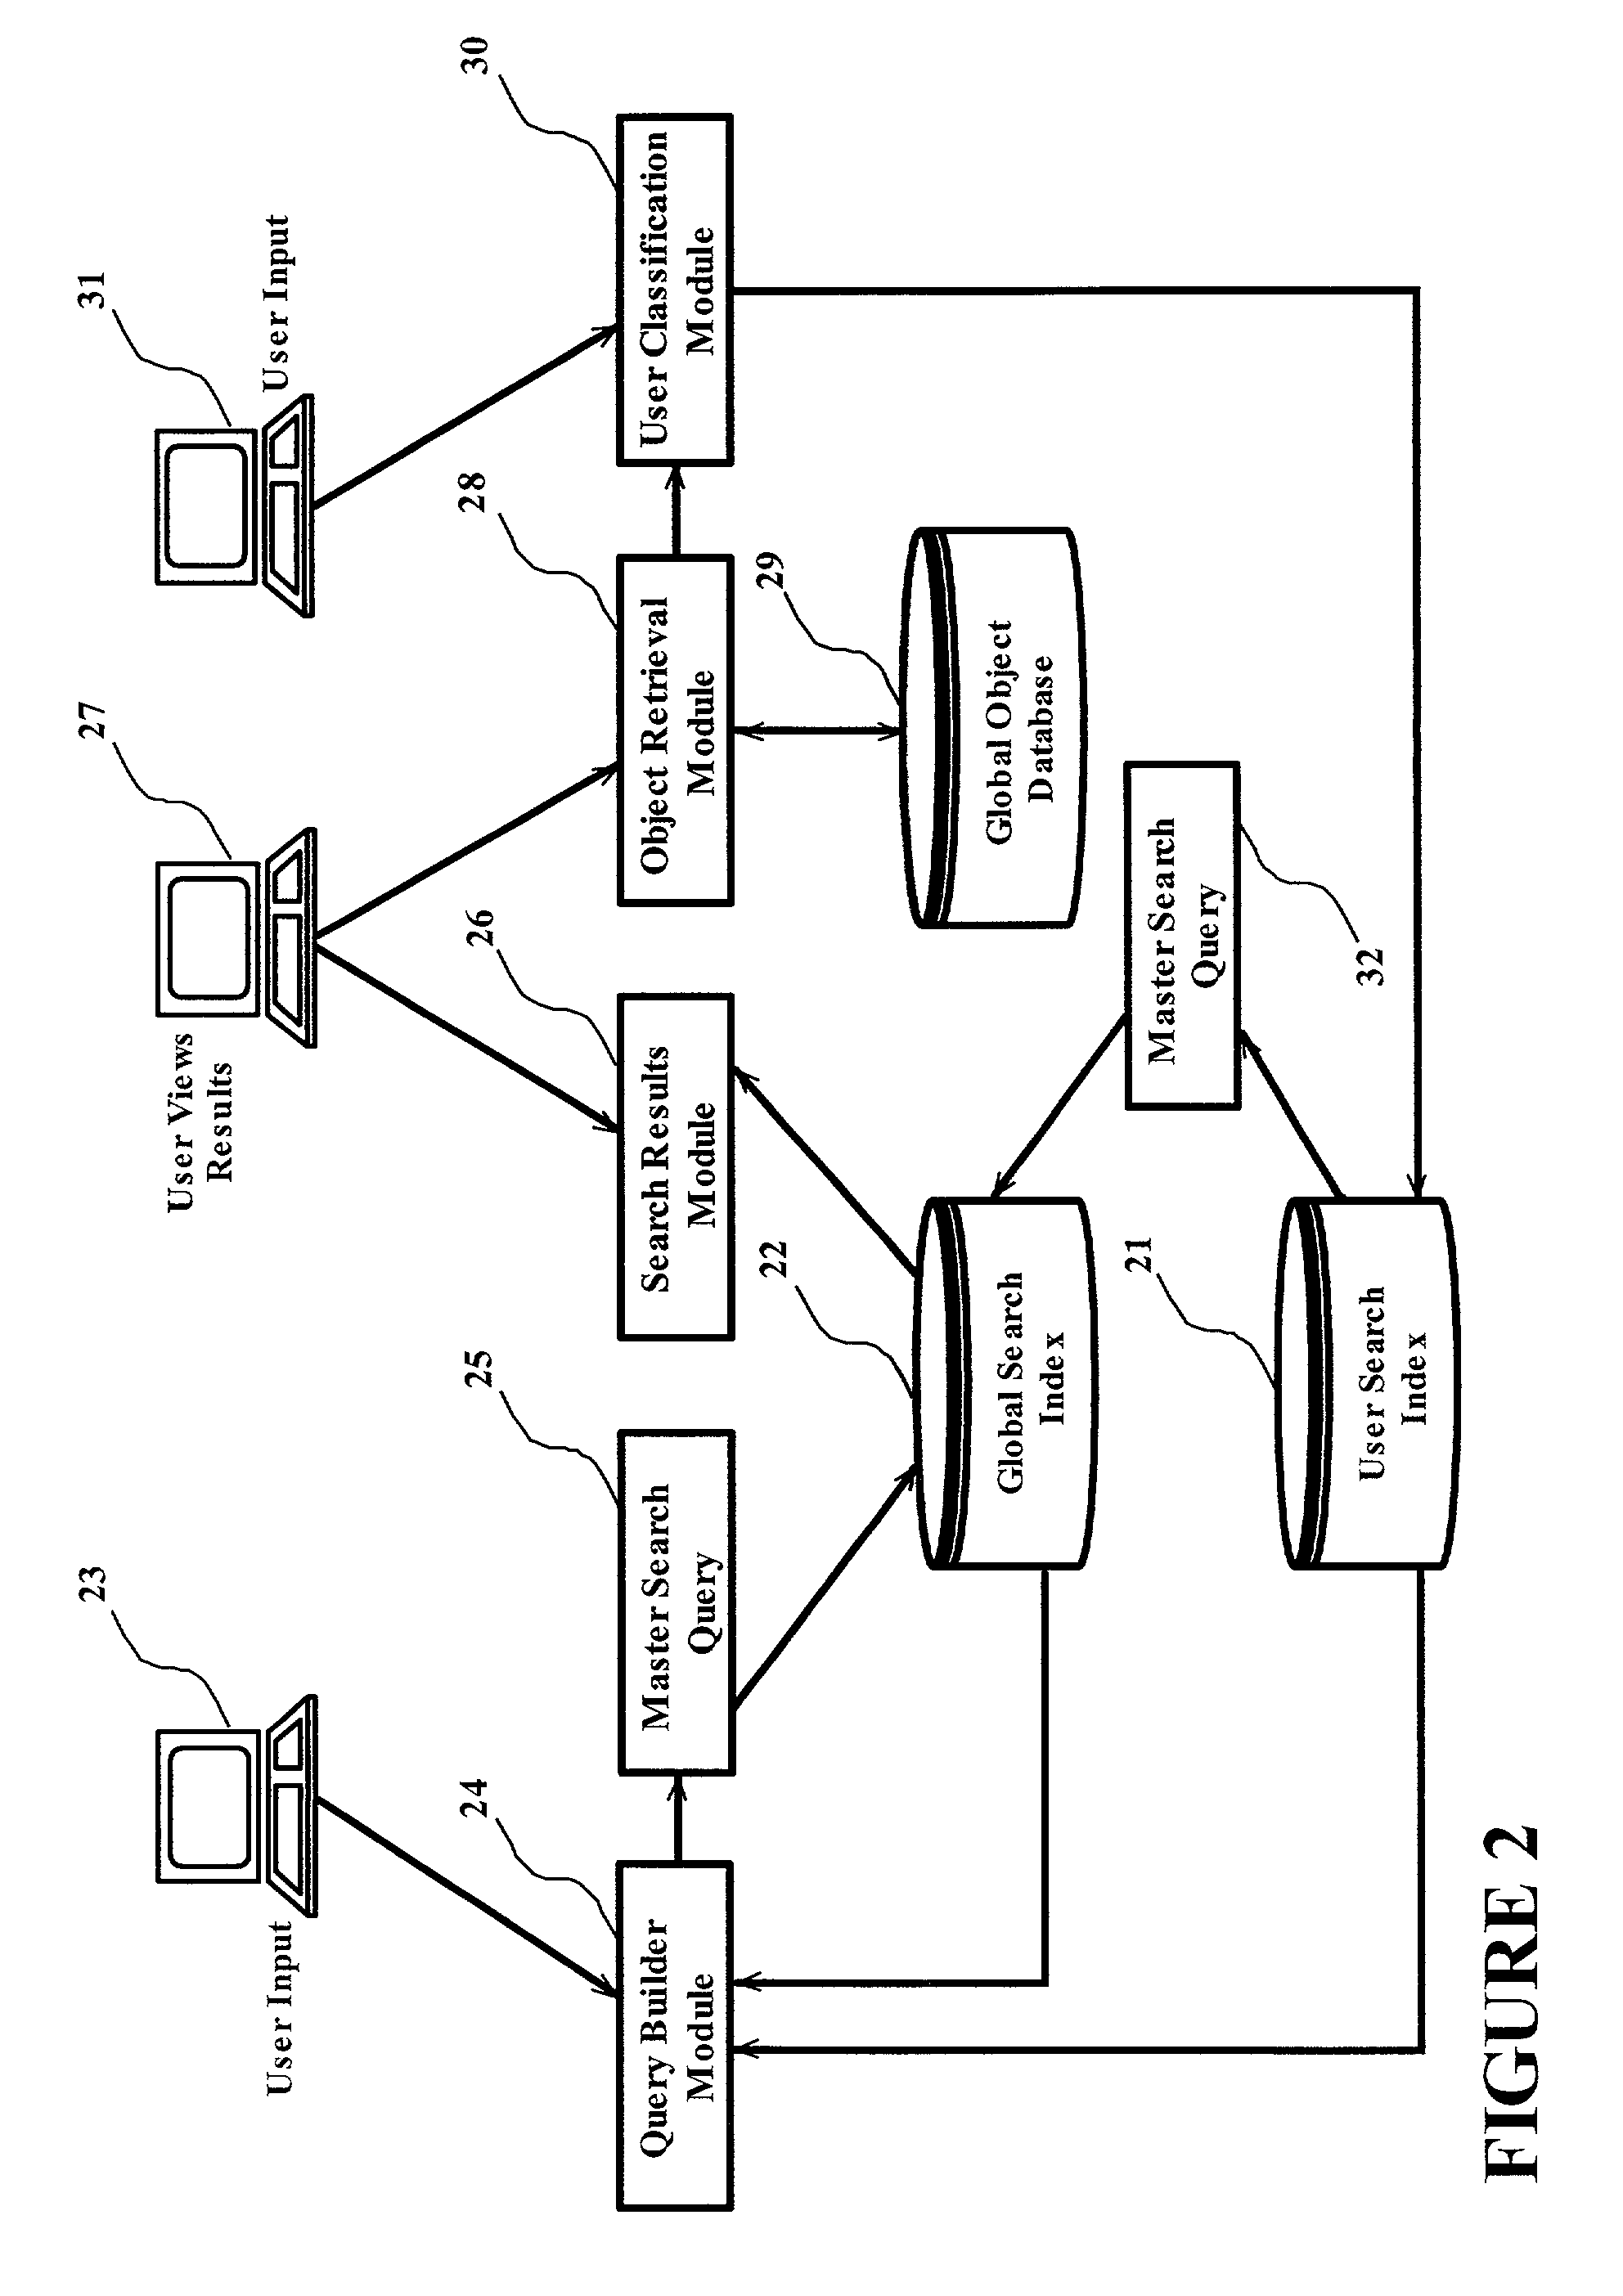 Method for classification